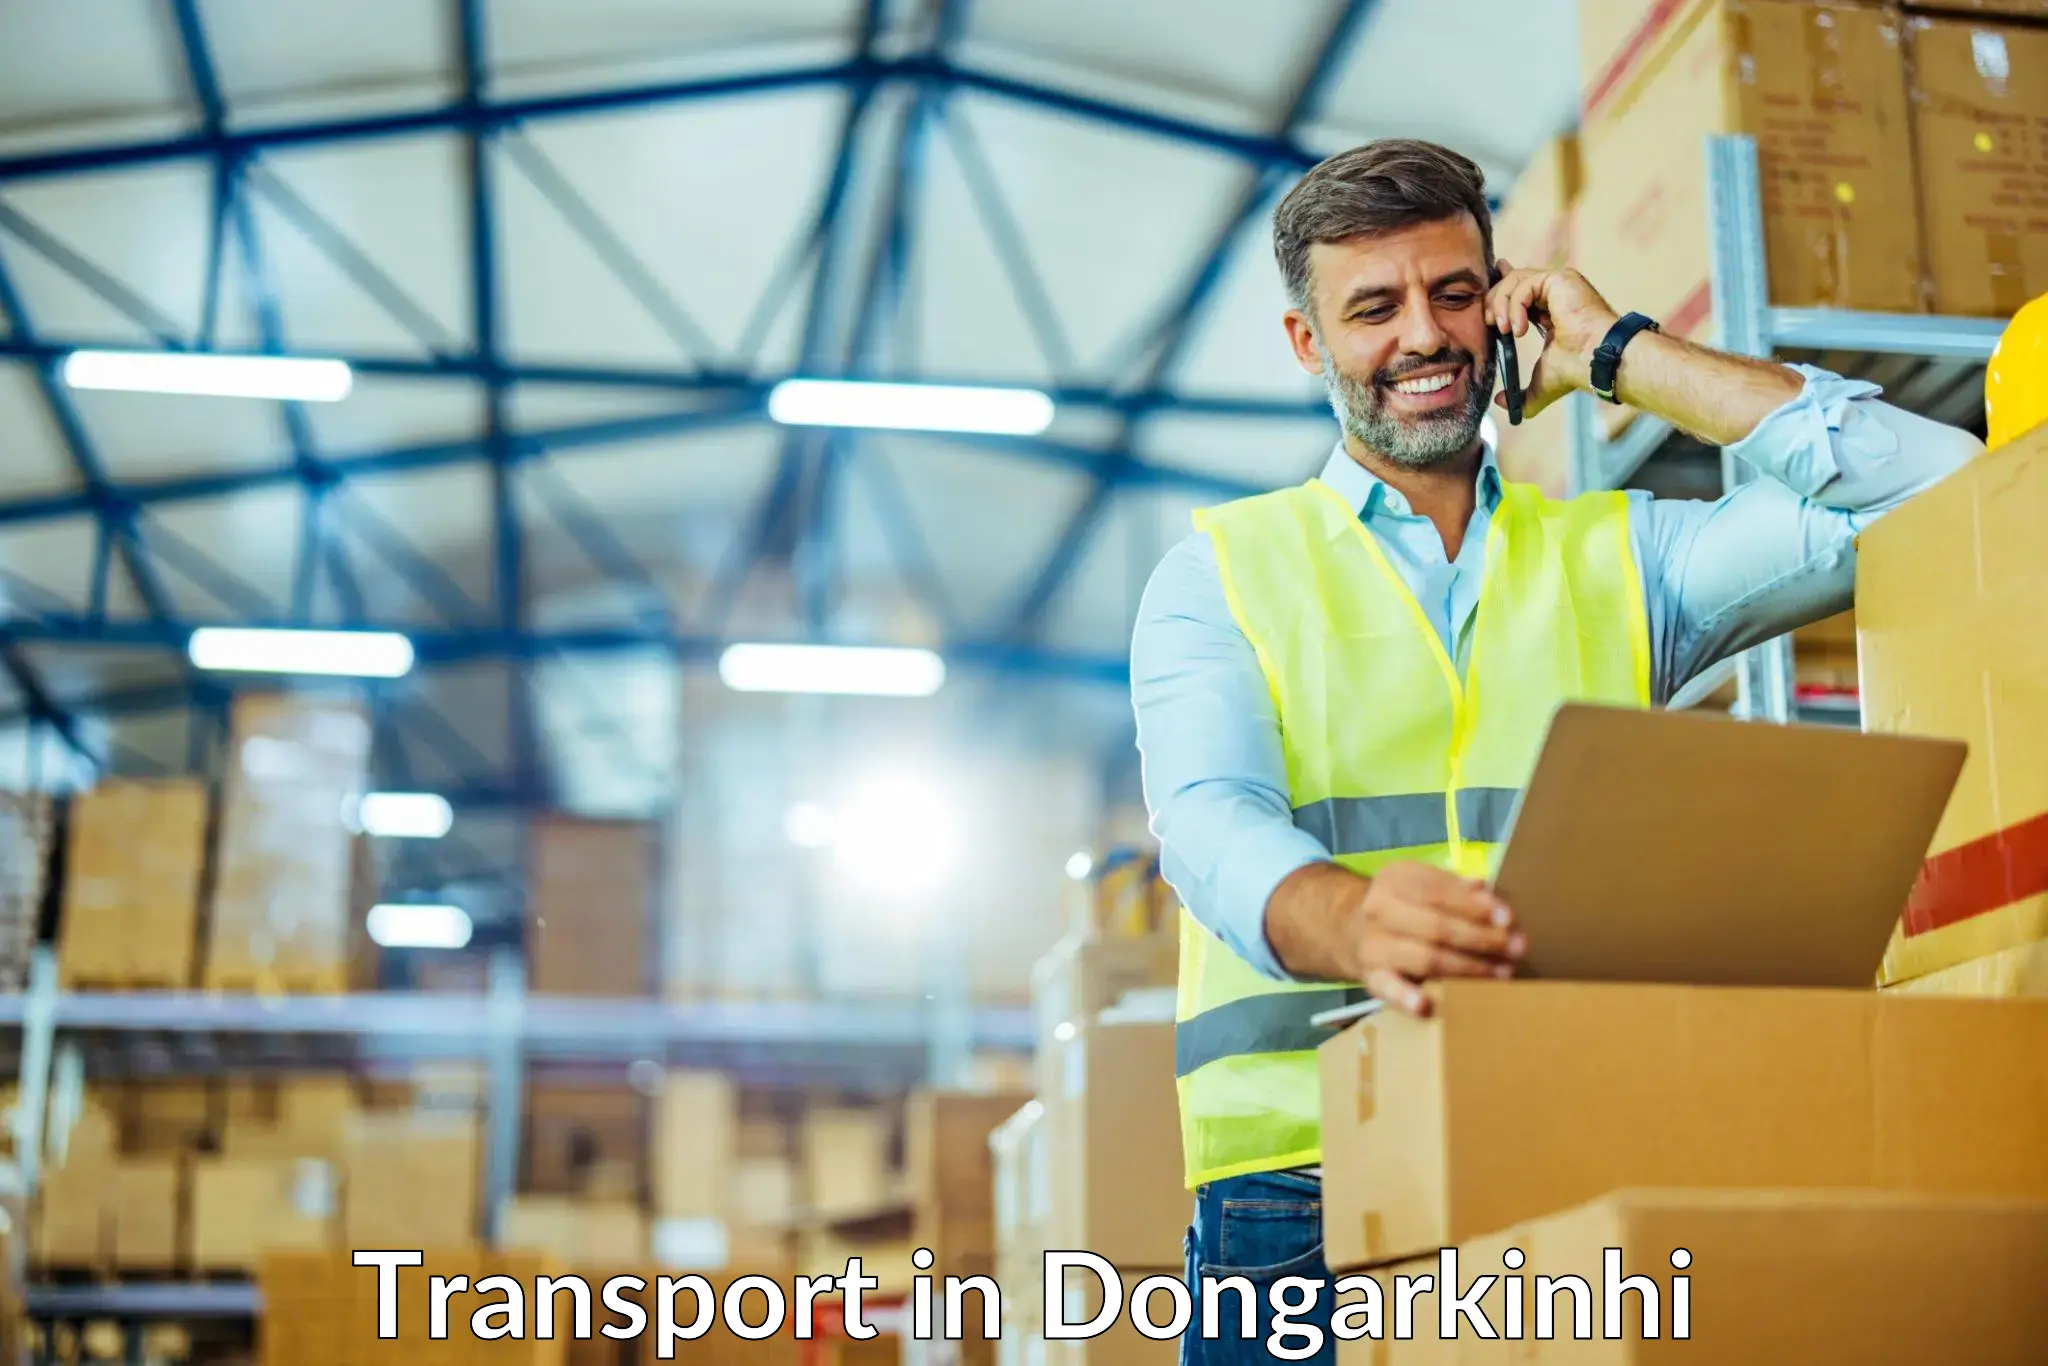 Pick up transport service in Dongarkinhi